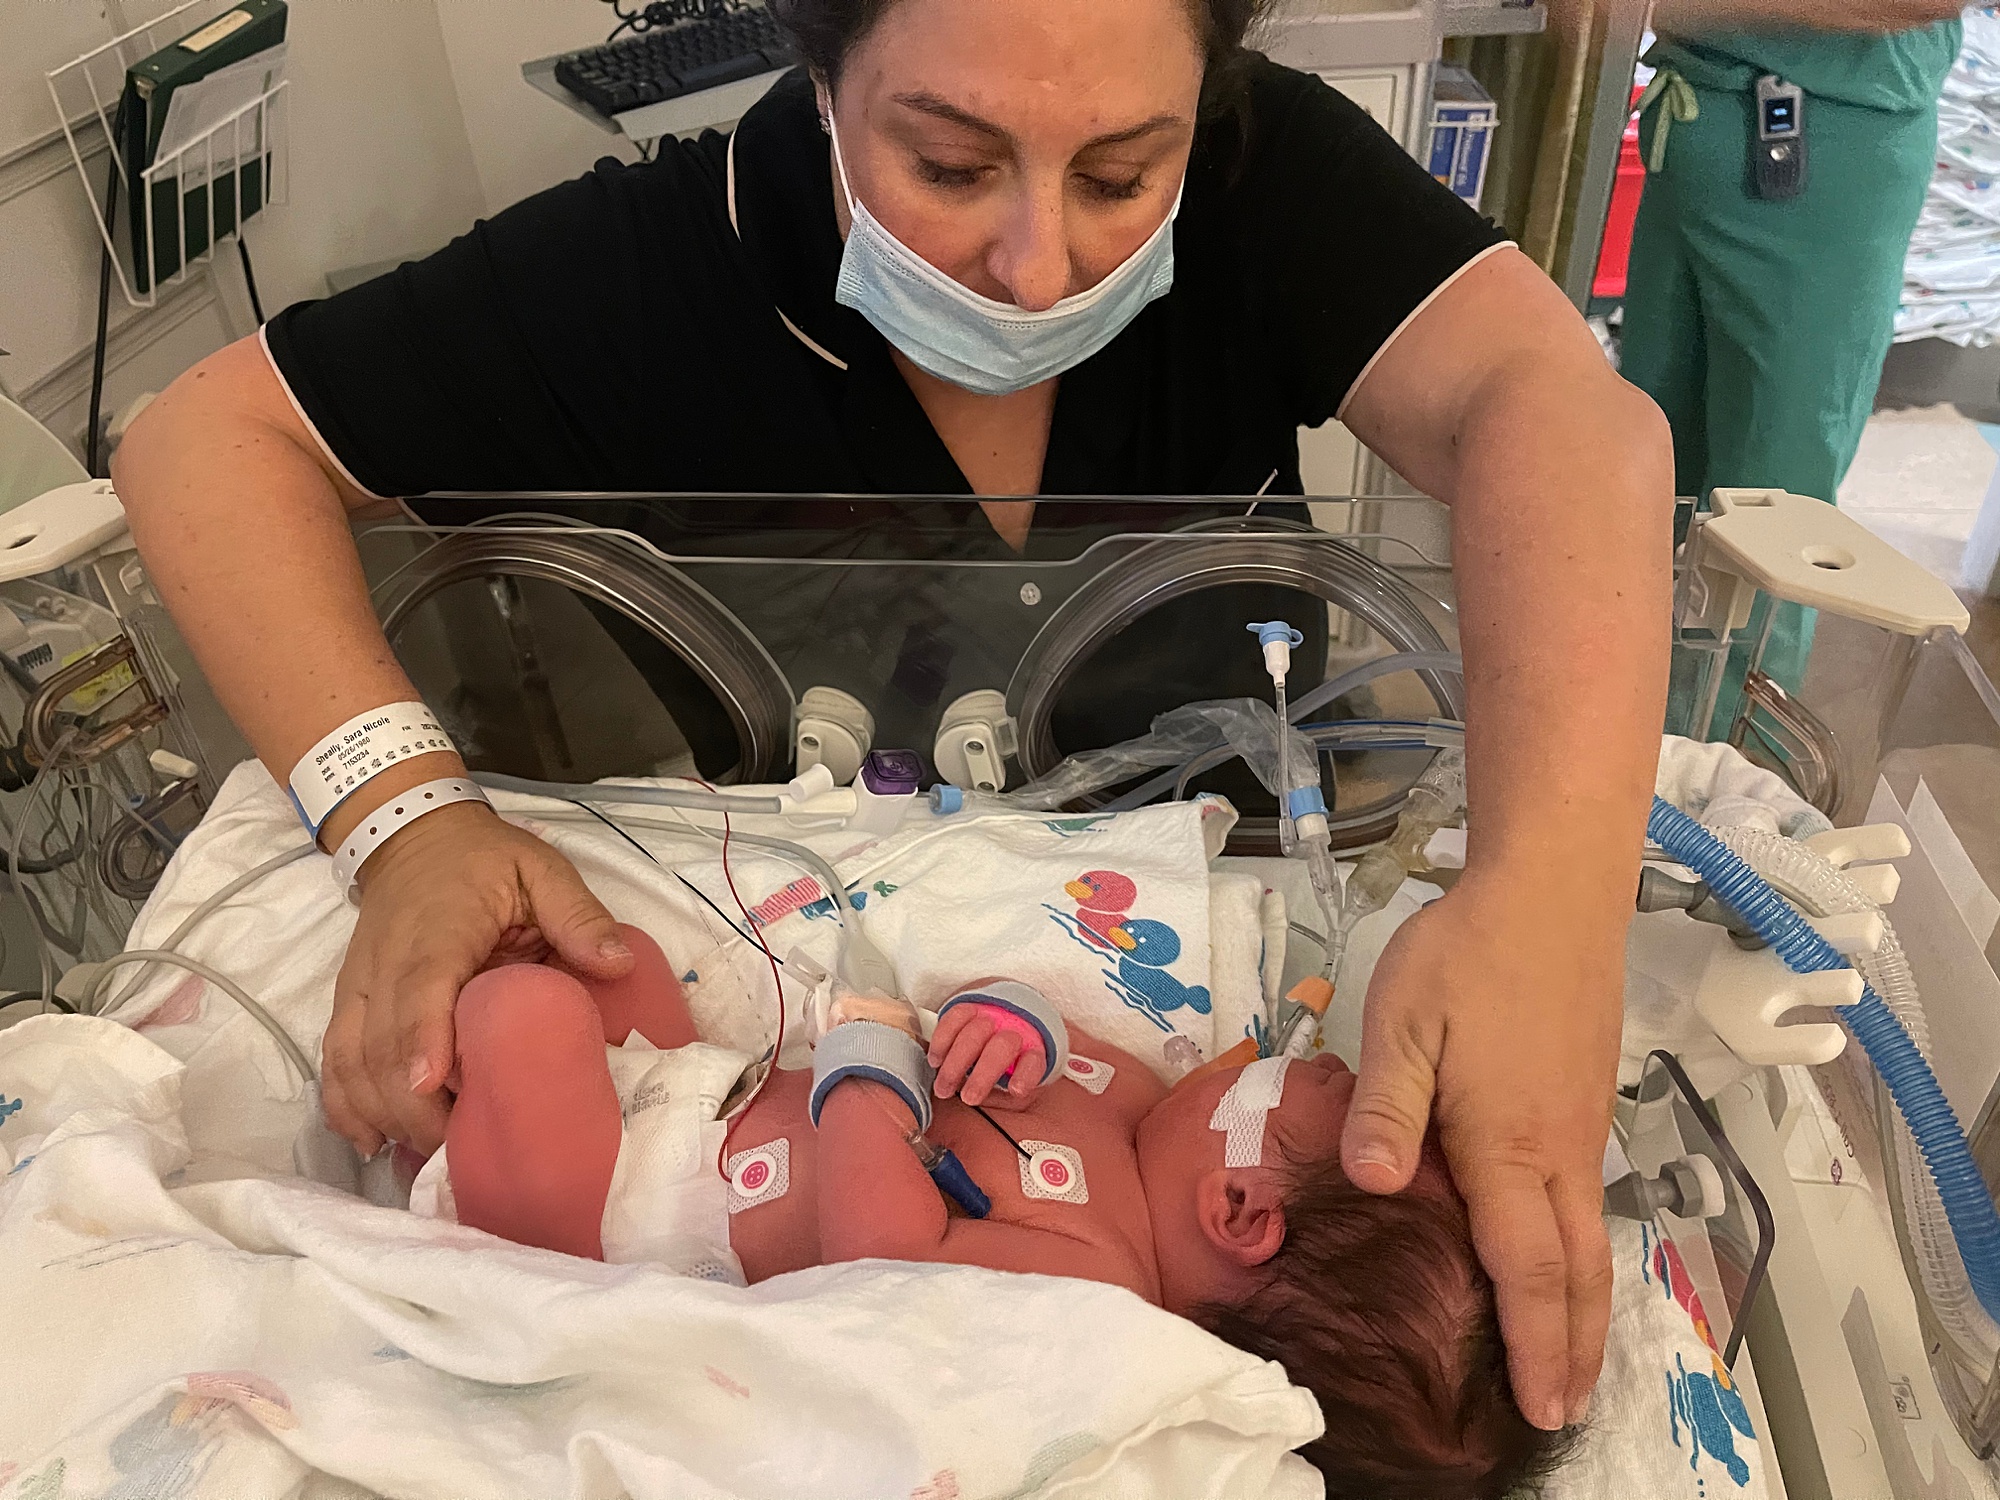 mom meets son 8 hours after giving birth